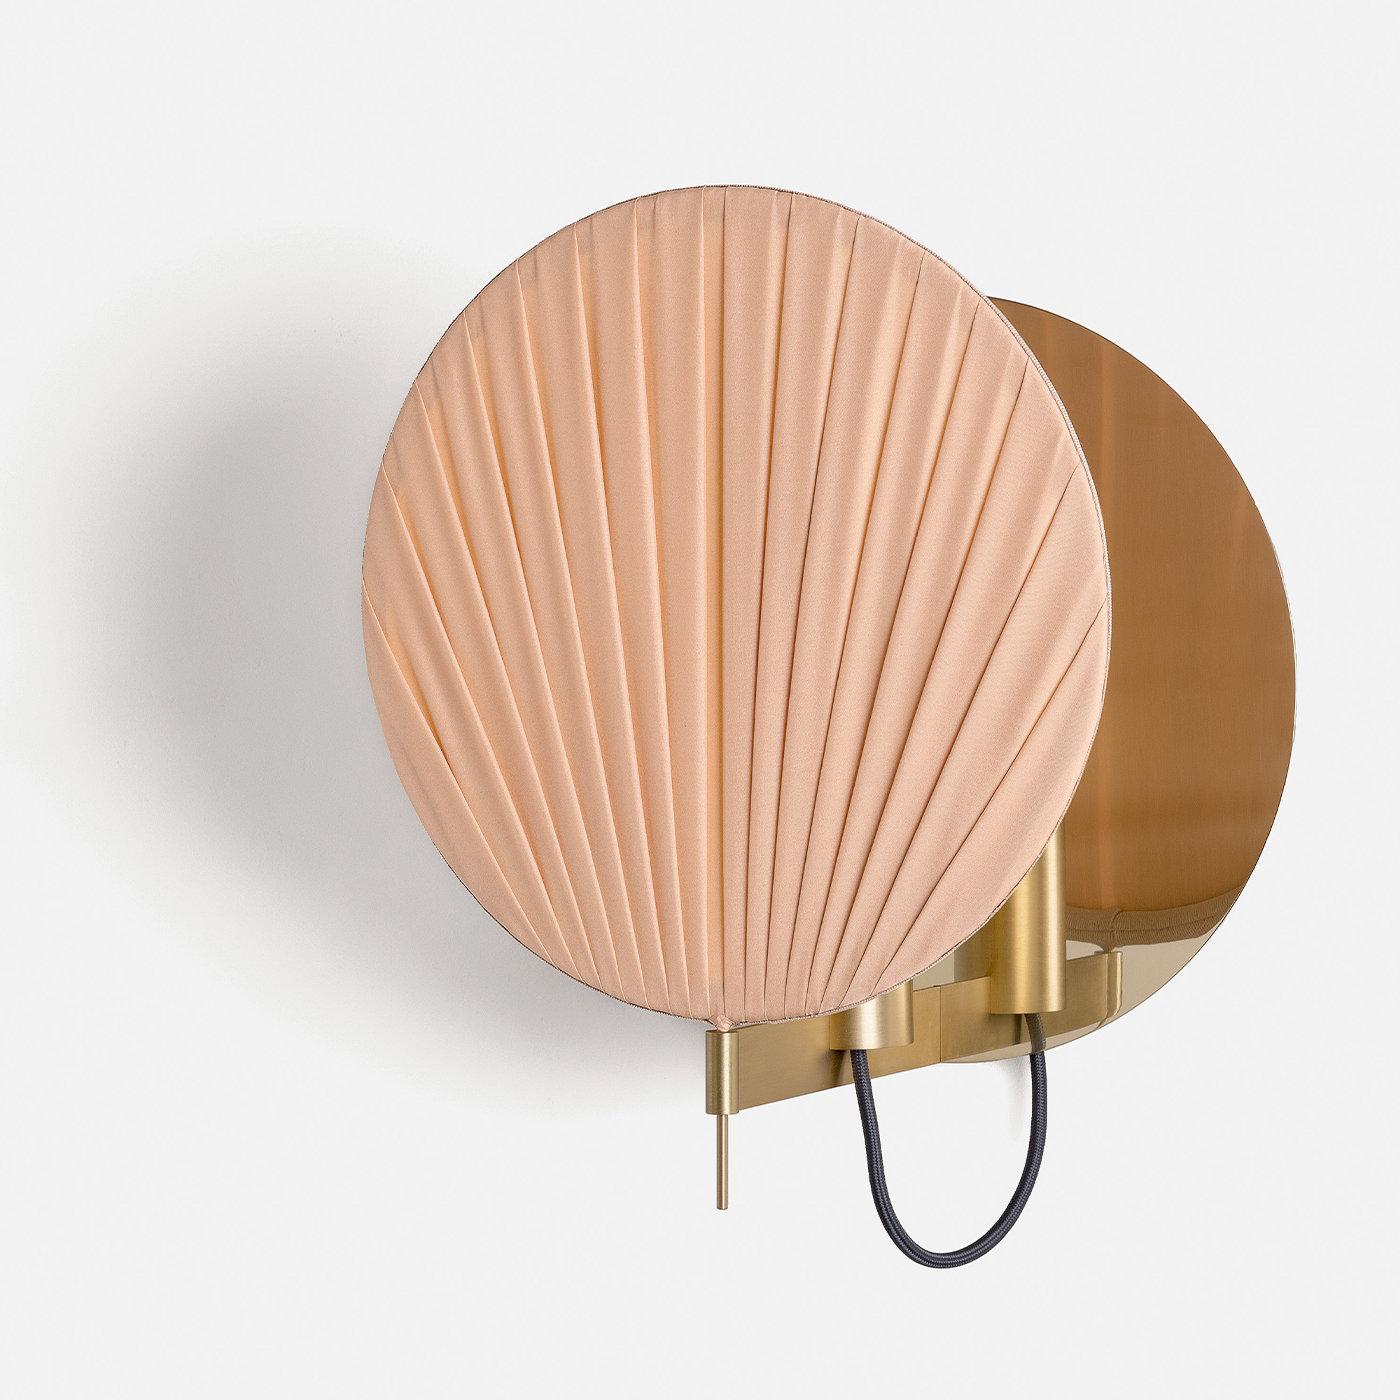 This intriguing object of functional decor was designed exclusively for Artemest's Fuorisalone 2018 event 